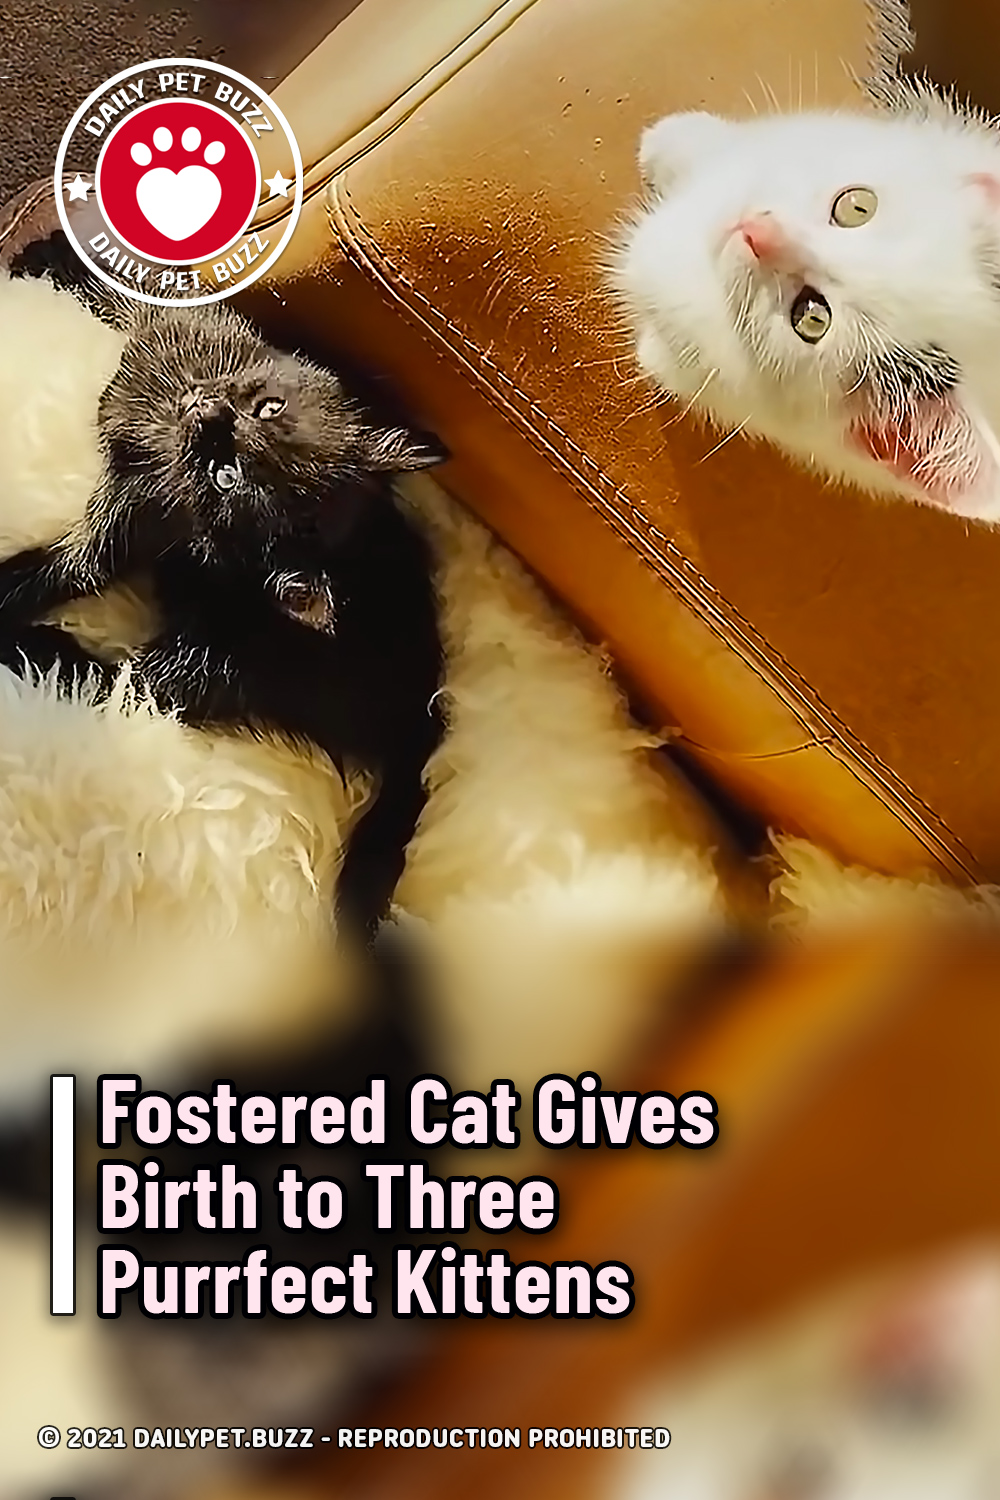 Fostered Cat Gives Birth to Three Purrfect Kittens